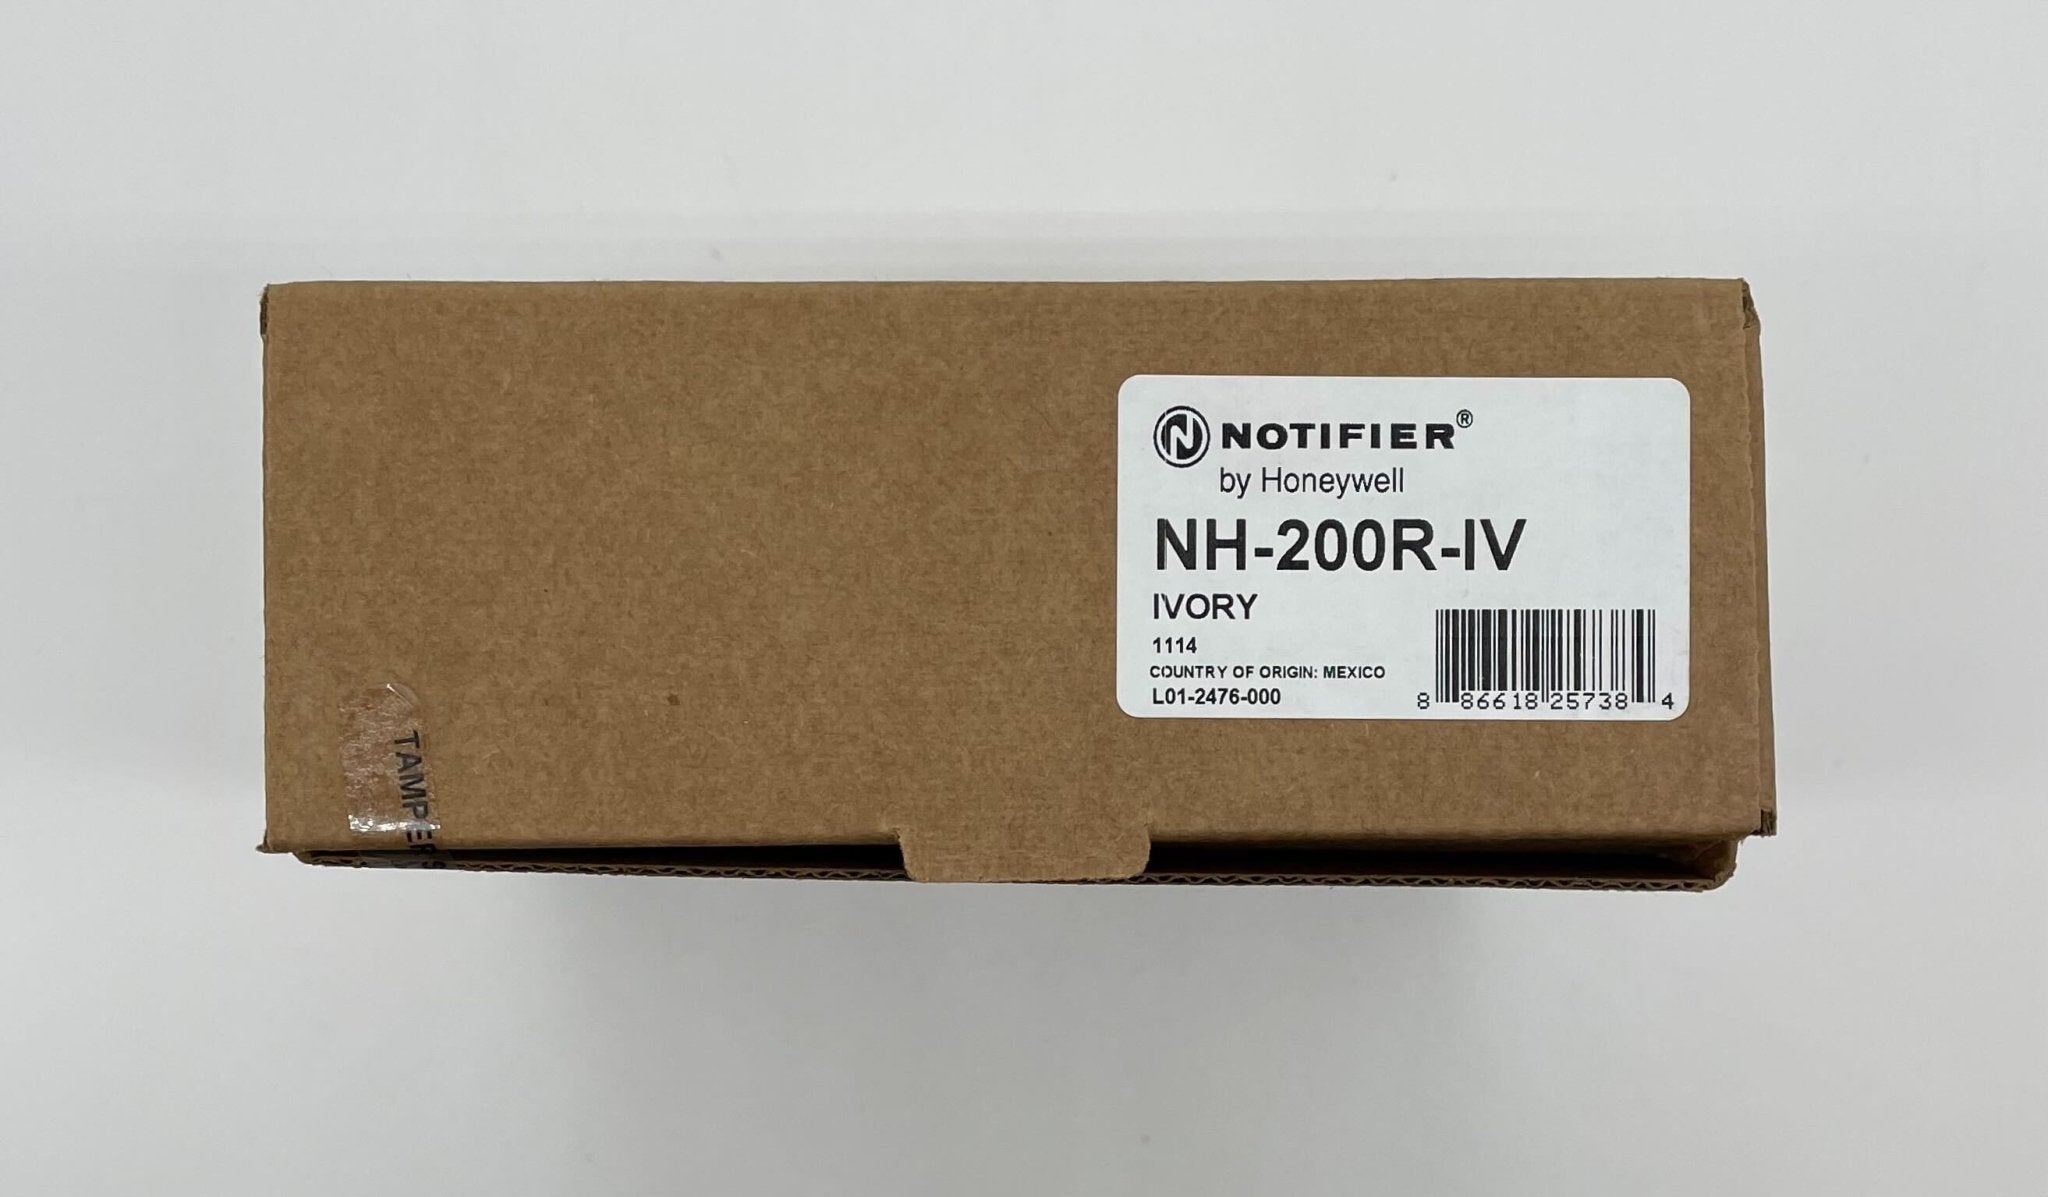 Notifier NH-200R-IV - The Fire Alarm Supplier